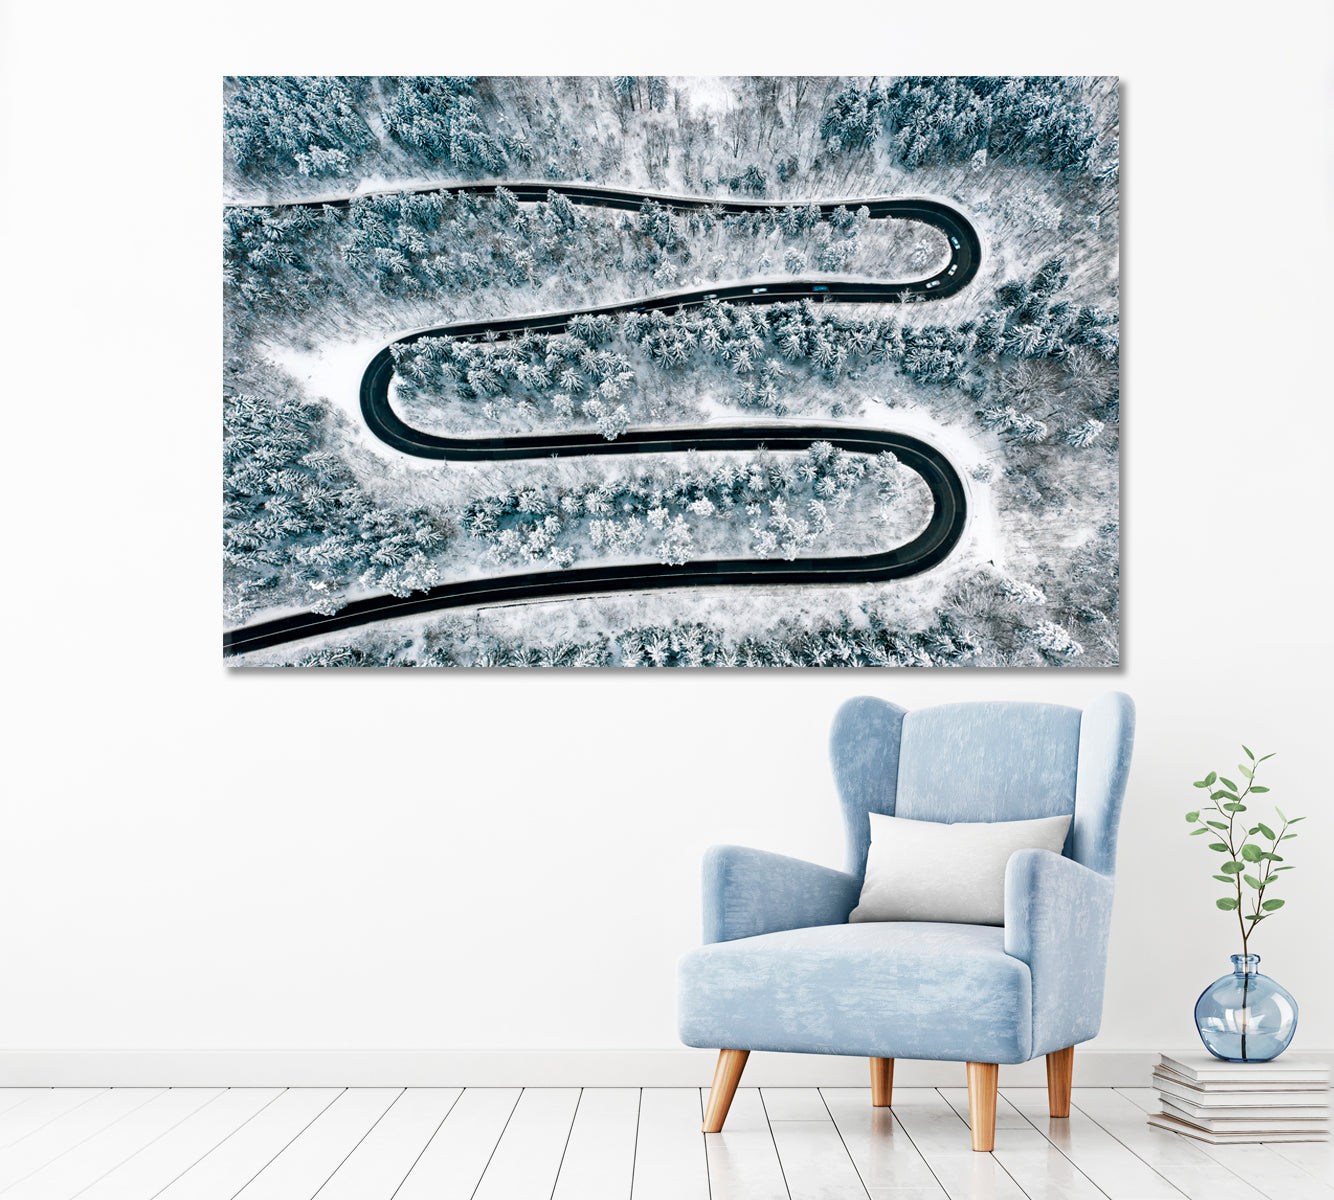 Winding Road in Winter Forest Canvas Print ArtLexy 1 Panel 24"x16" inches 